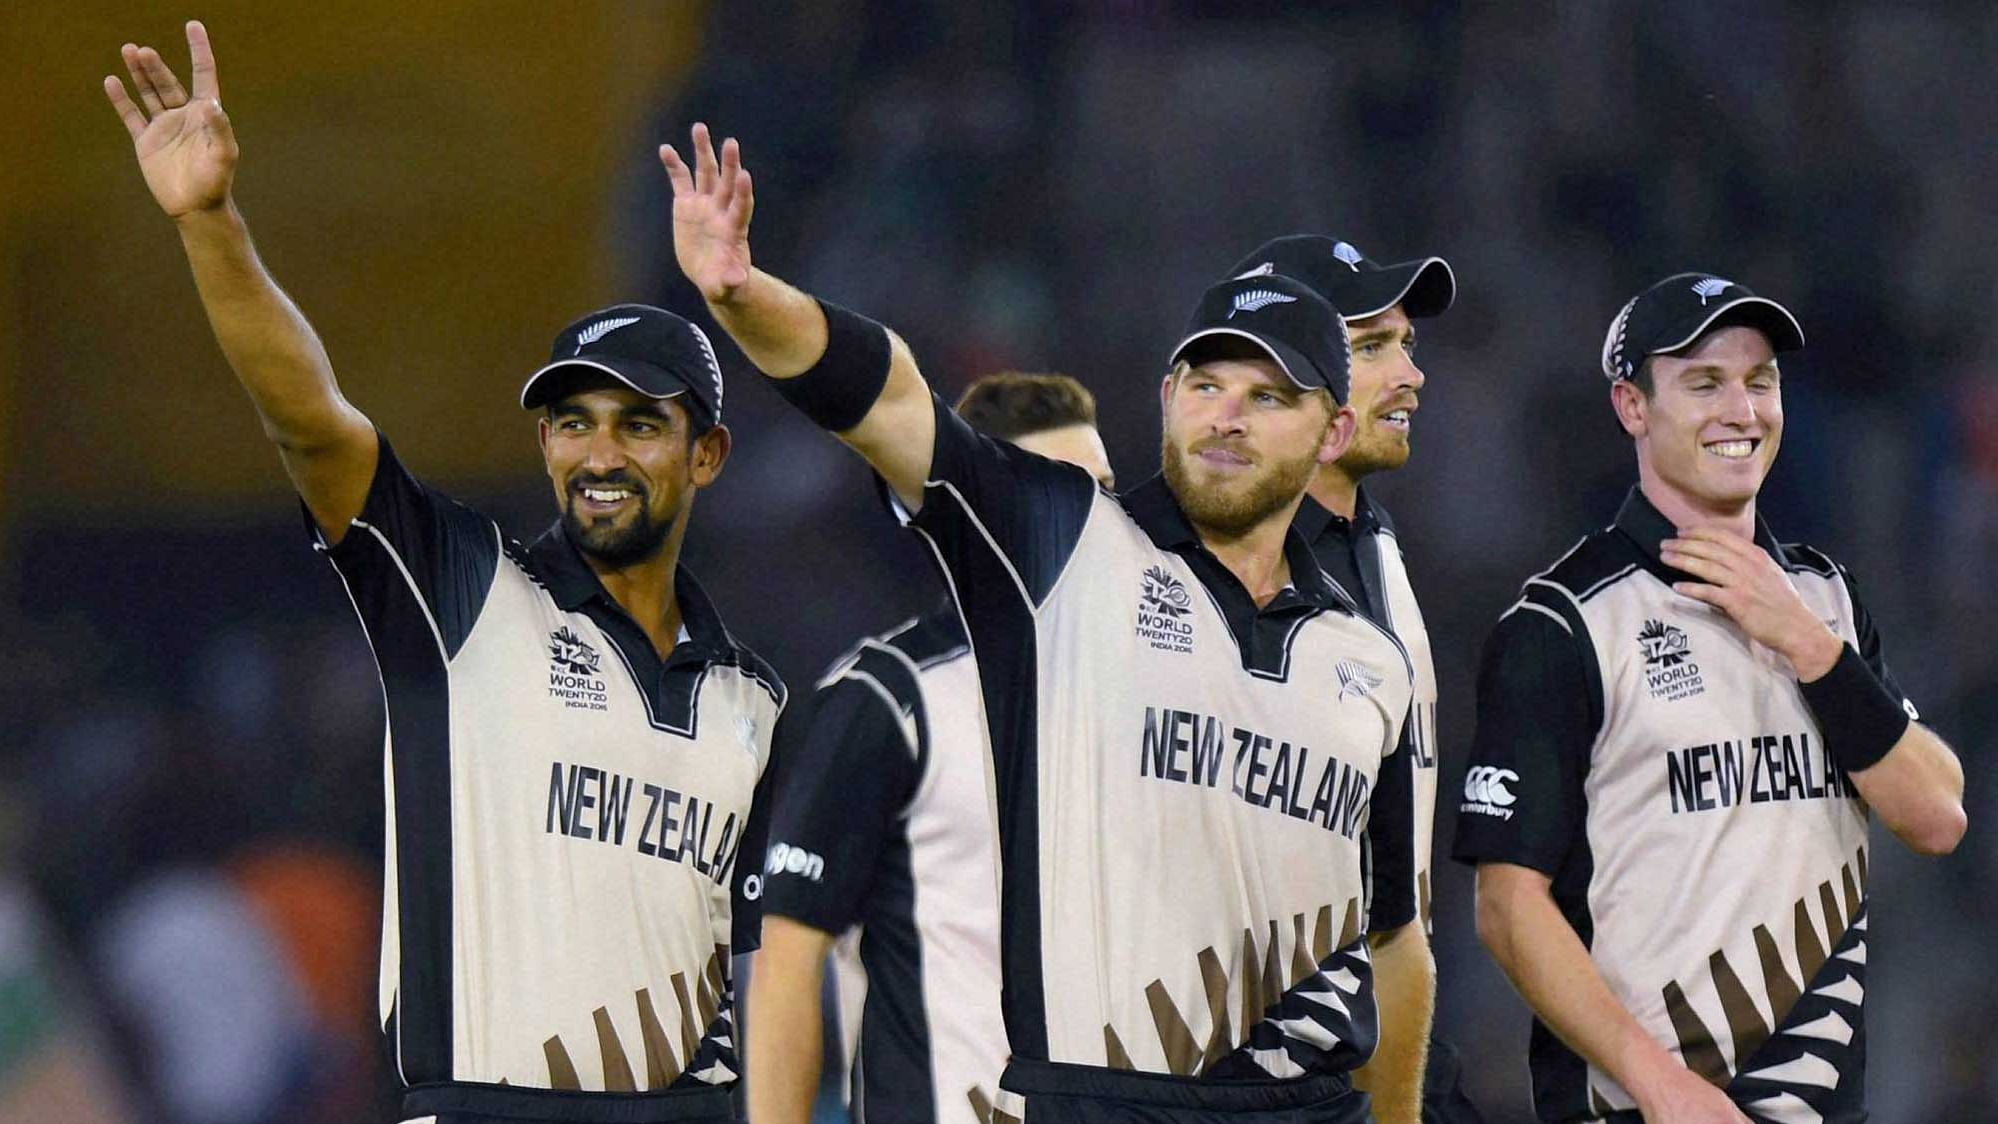 Mohali: New Zealand players celebrate win over Pakistan in the ICC World T20. (Photo: PTI)